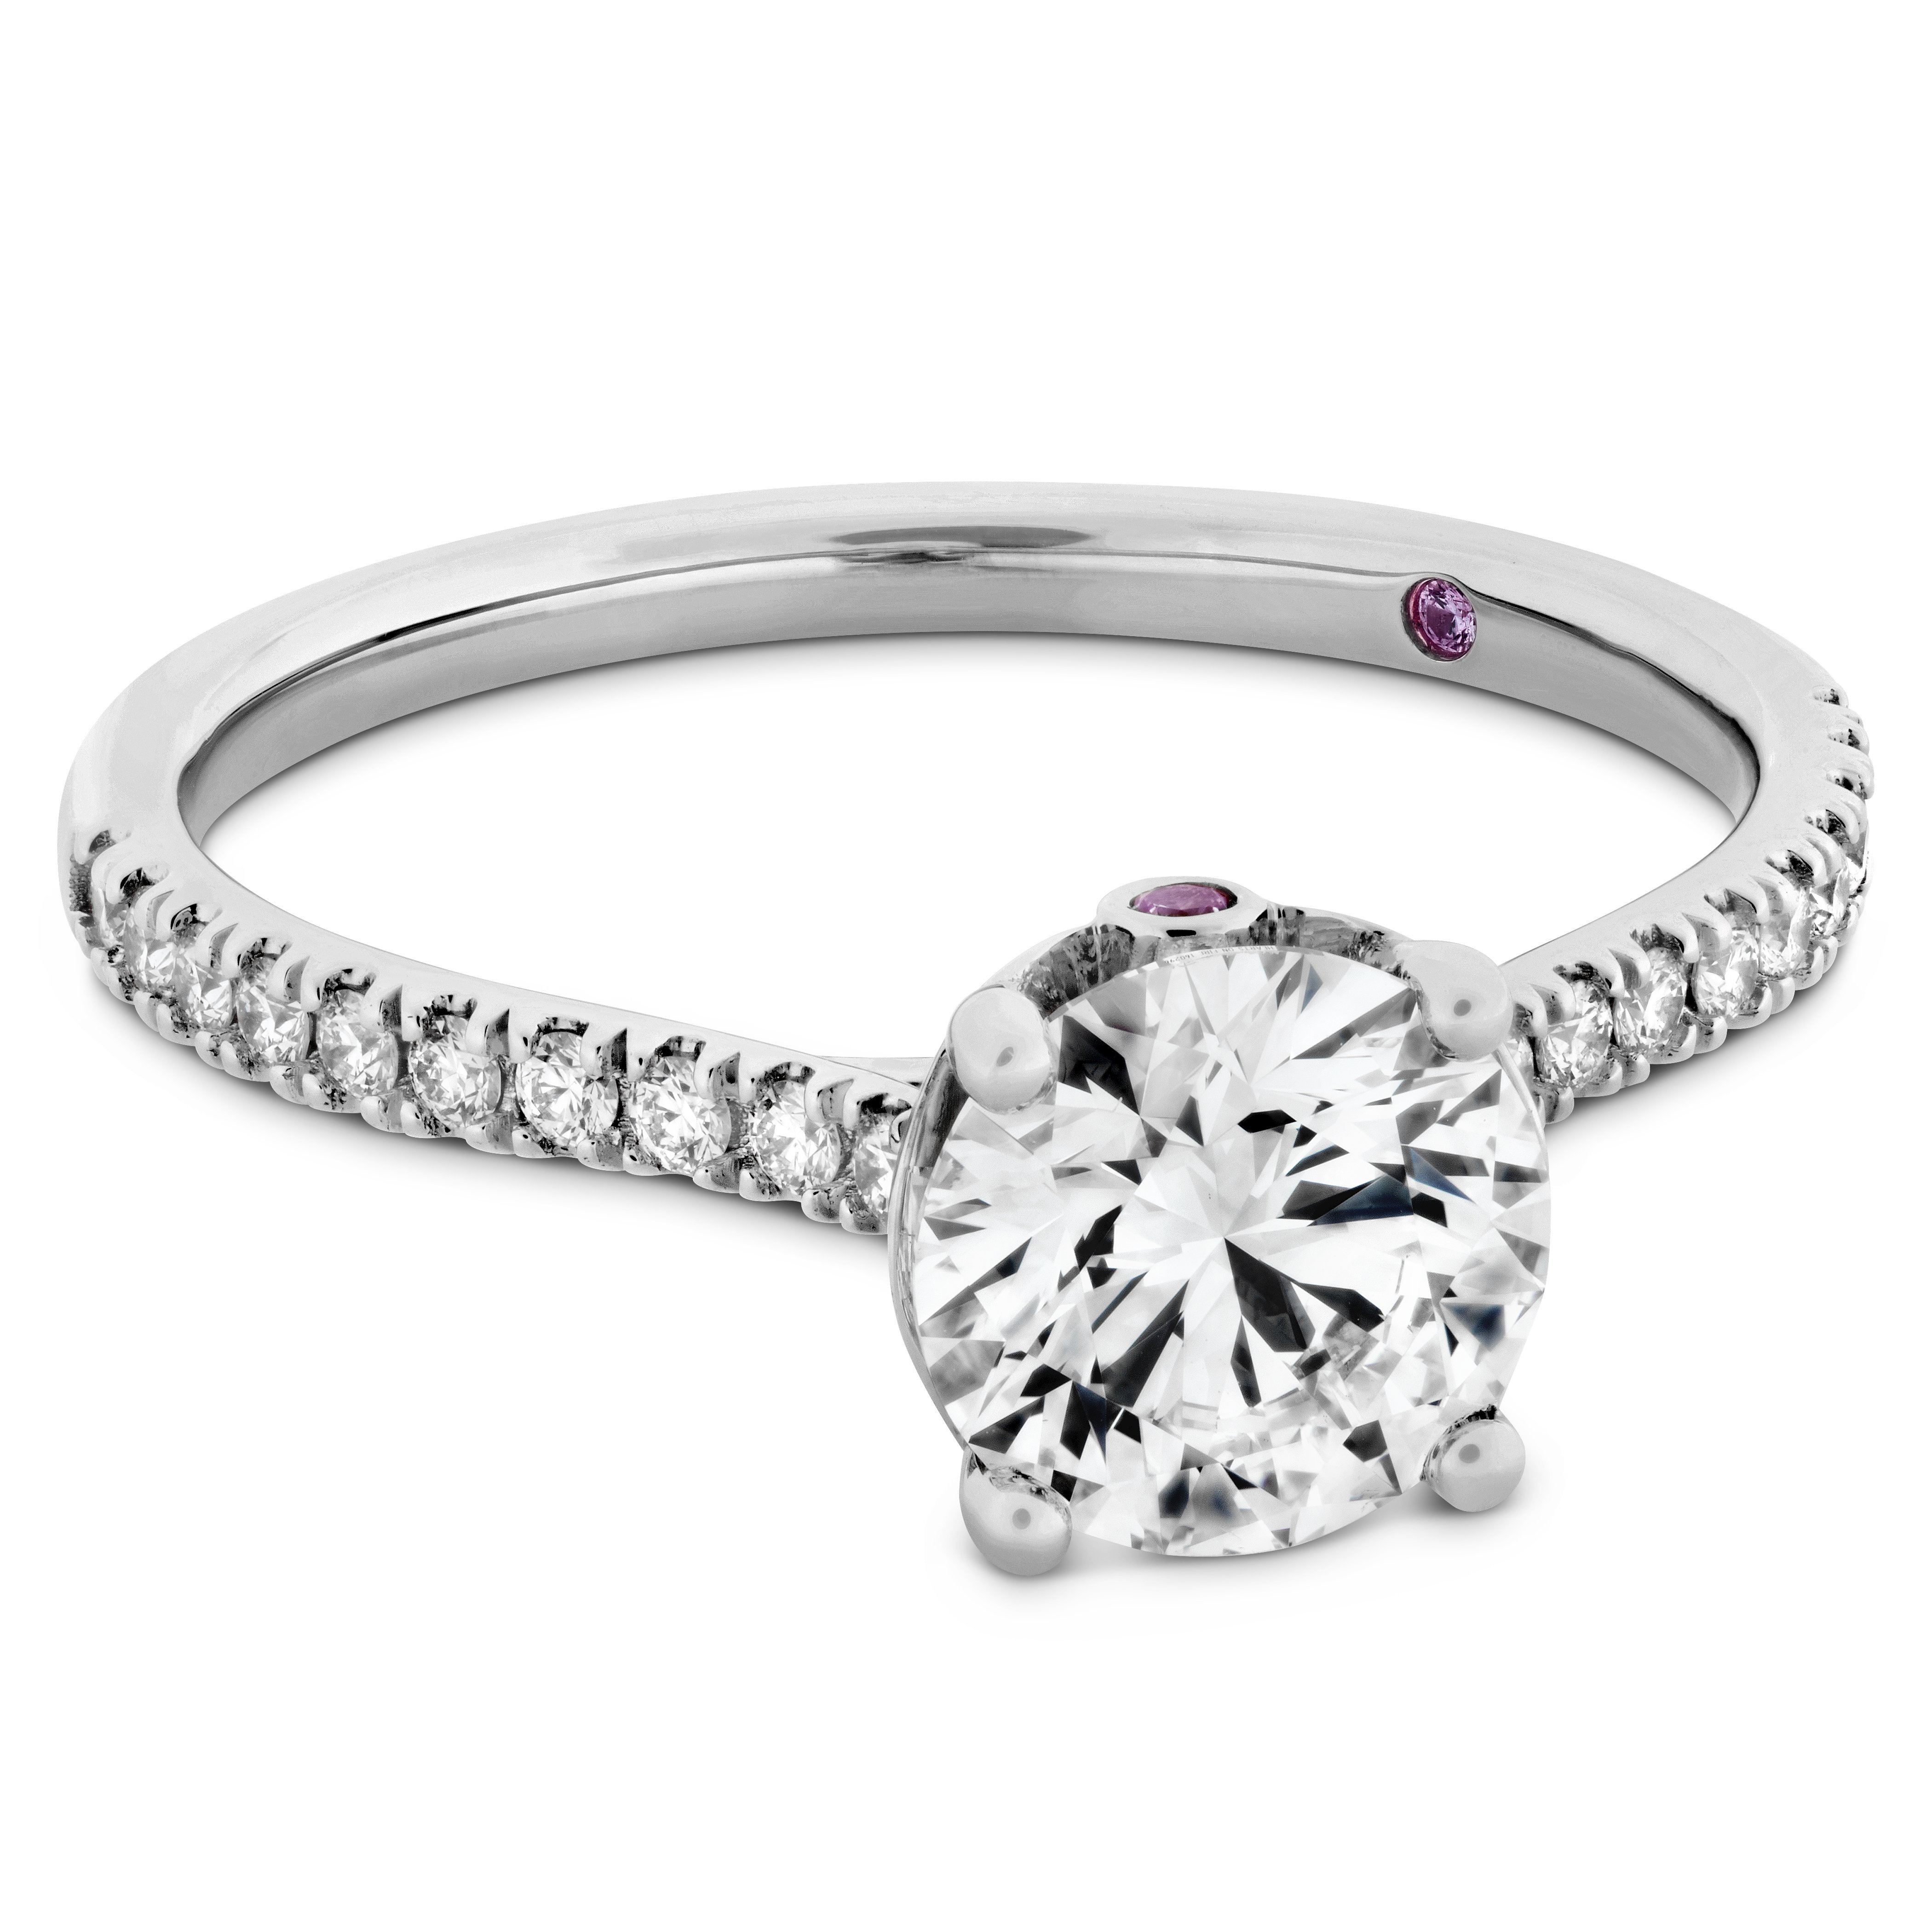 https://www.arthursjewelers.com/content/images/thumbs/Original/Sloane Silhouette Engagement Ring Diamond Band with Sapphires_1-176288851.jpg